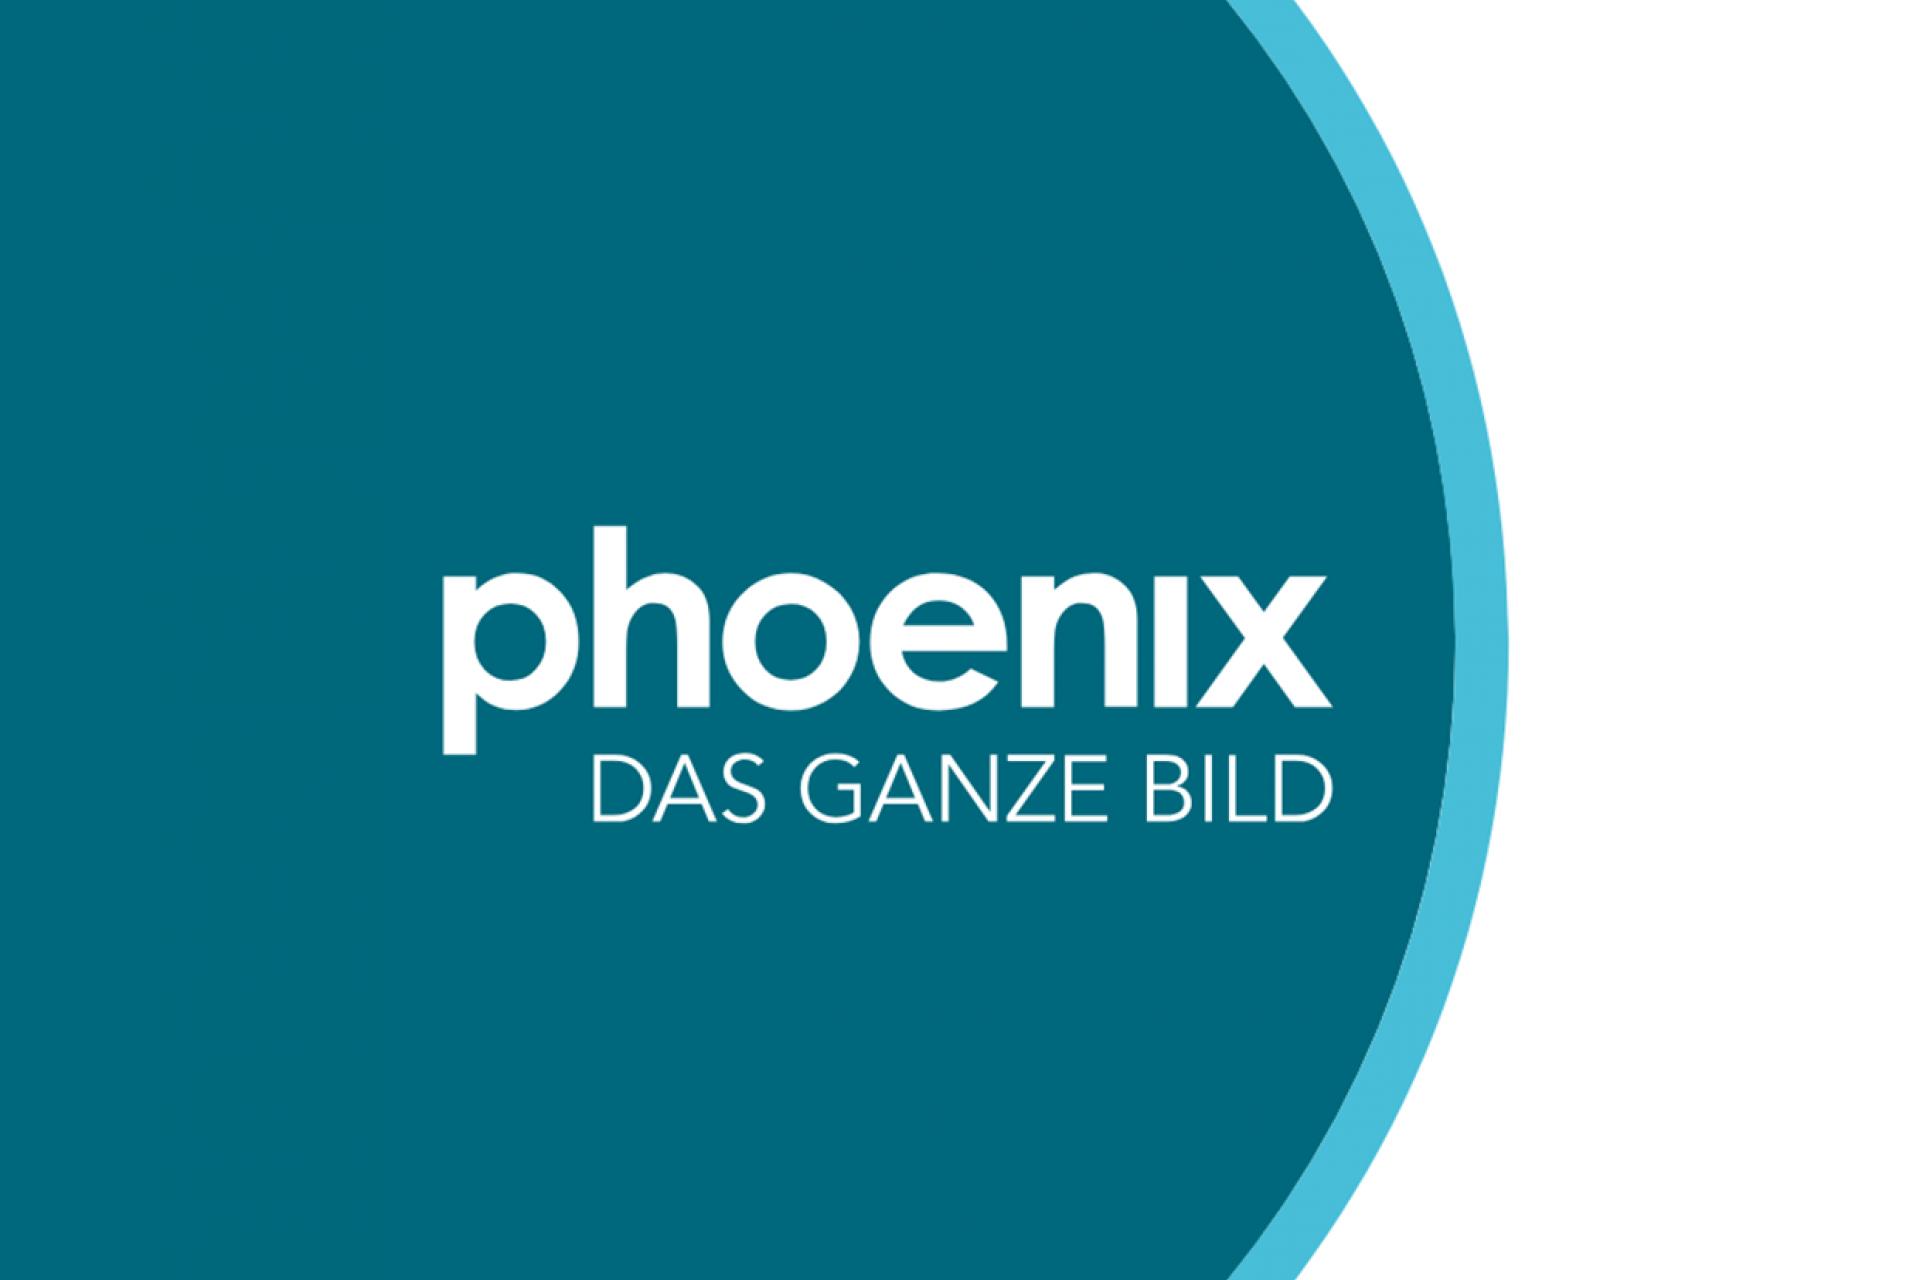 phoenix for Android - APK Download